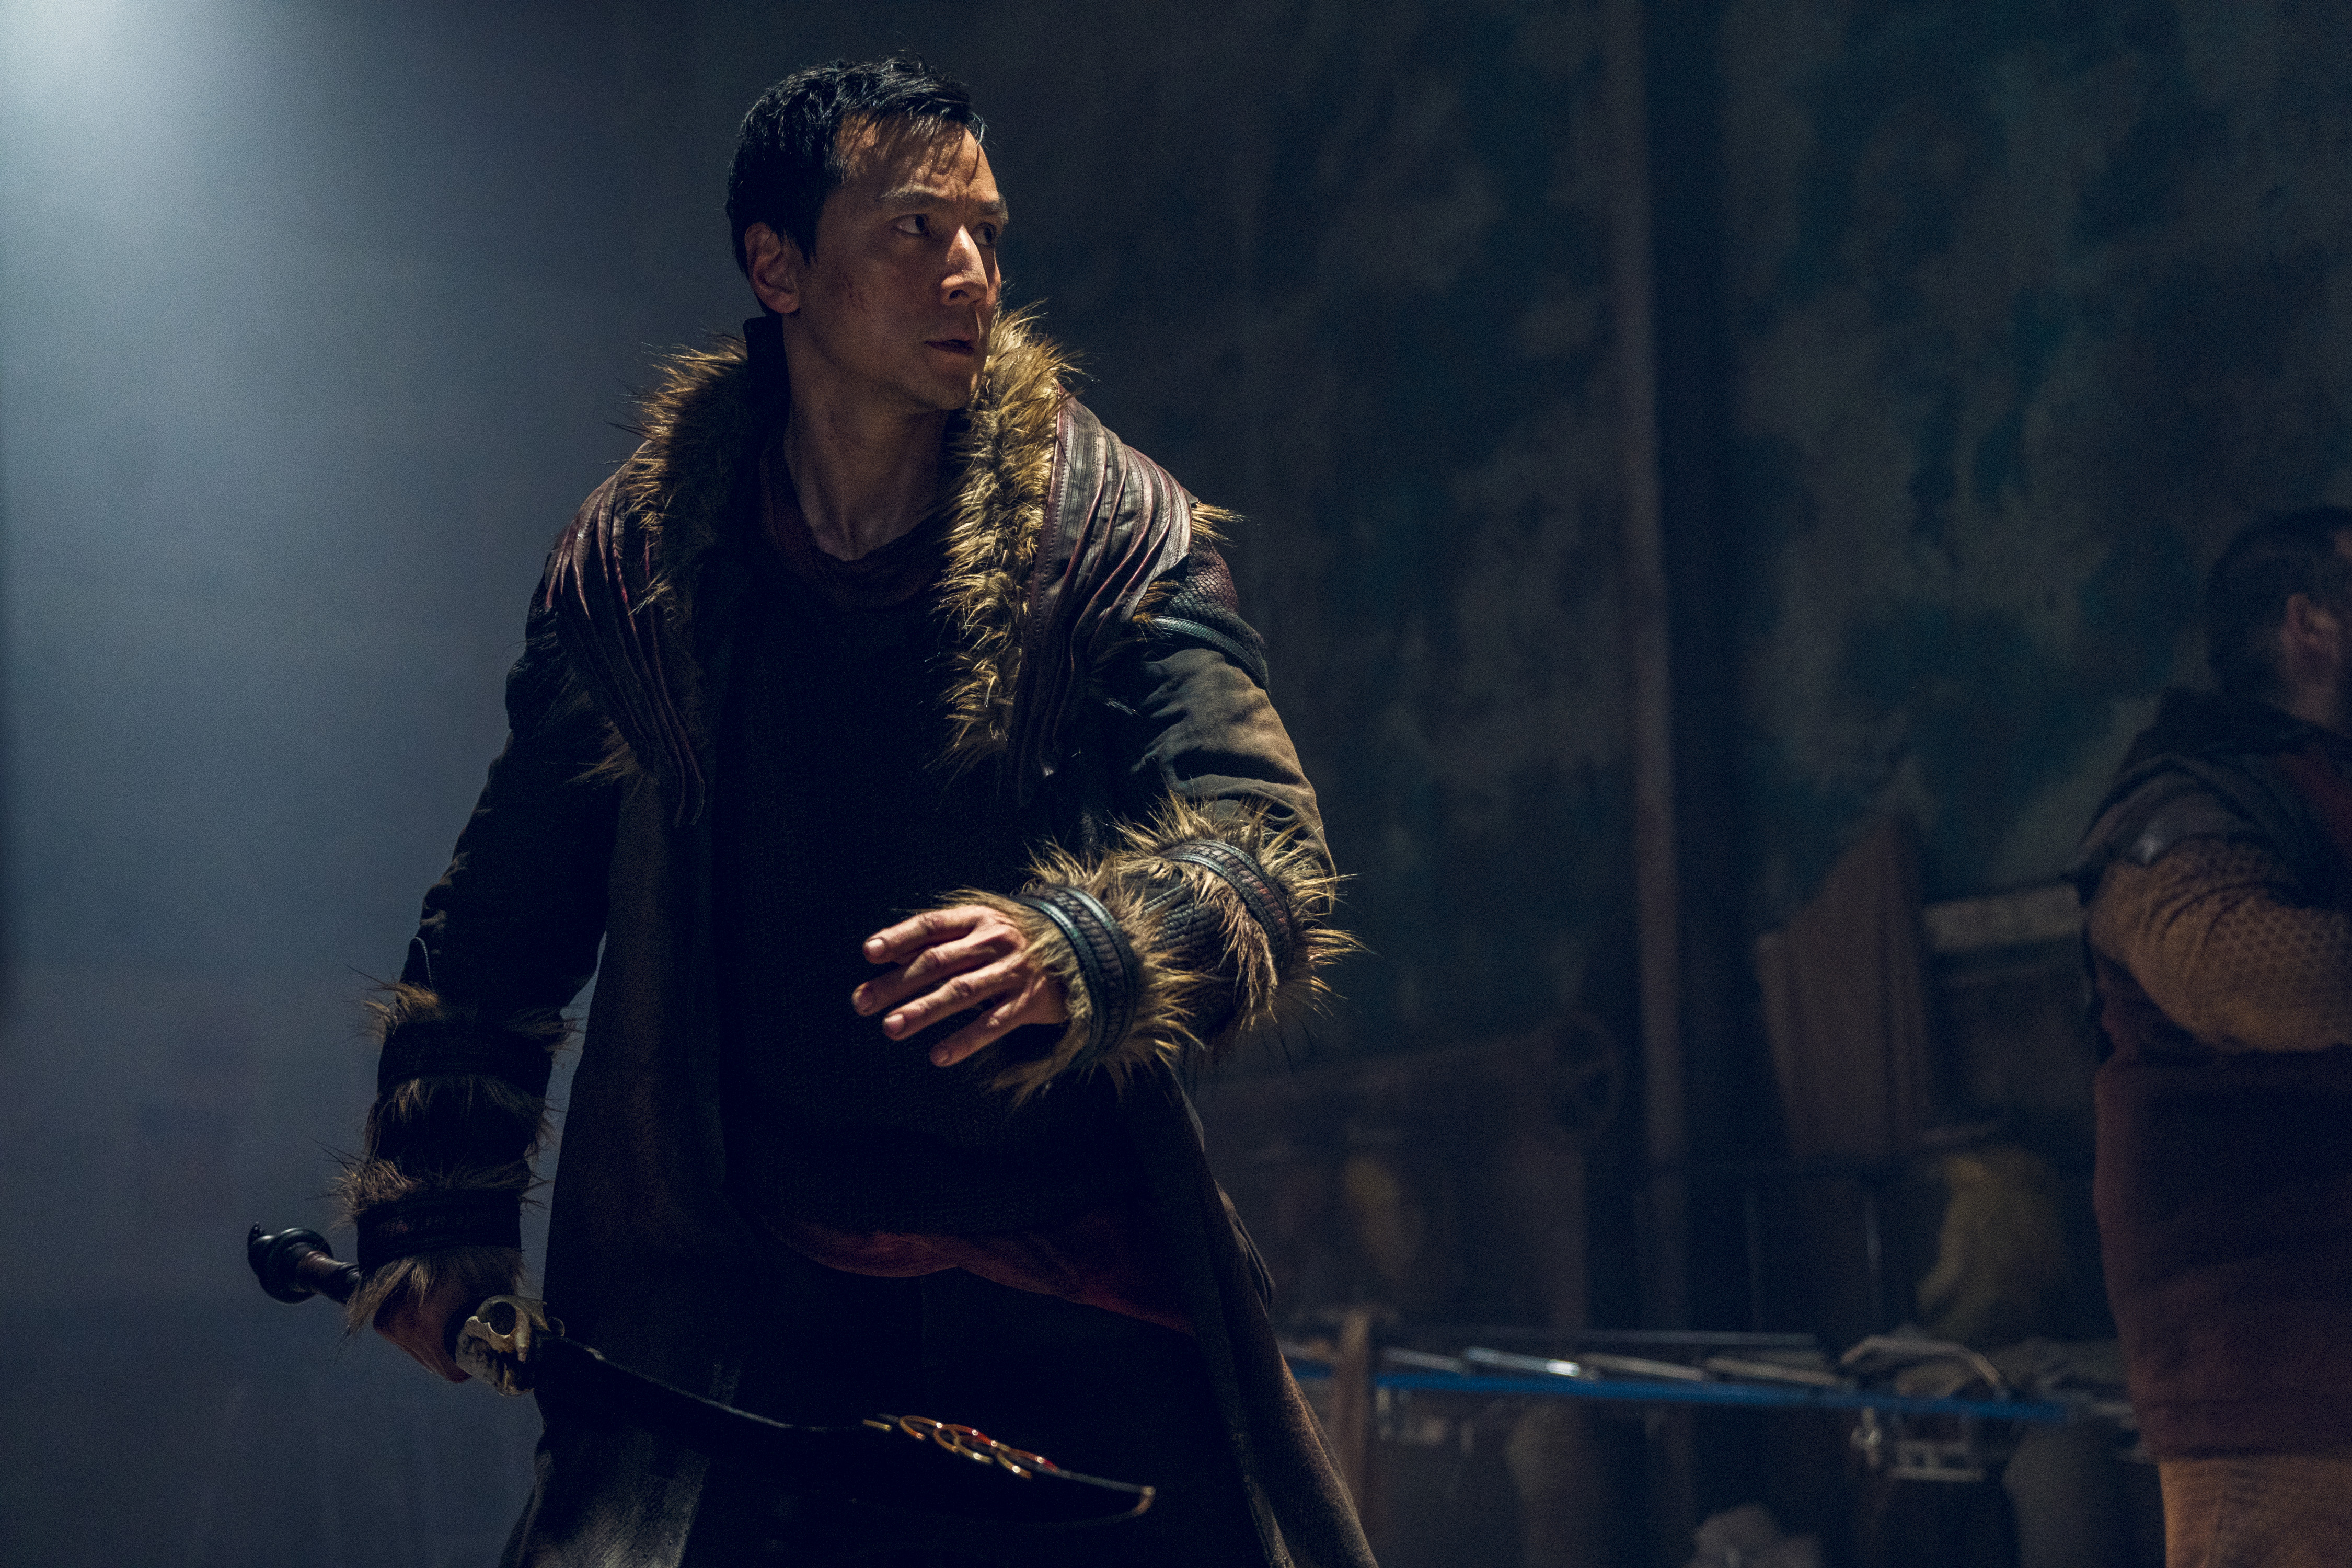 Daniel Wu as Sunny. He's wearing a fur-lined coat and holds his sword. 